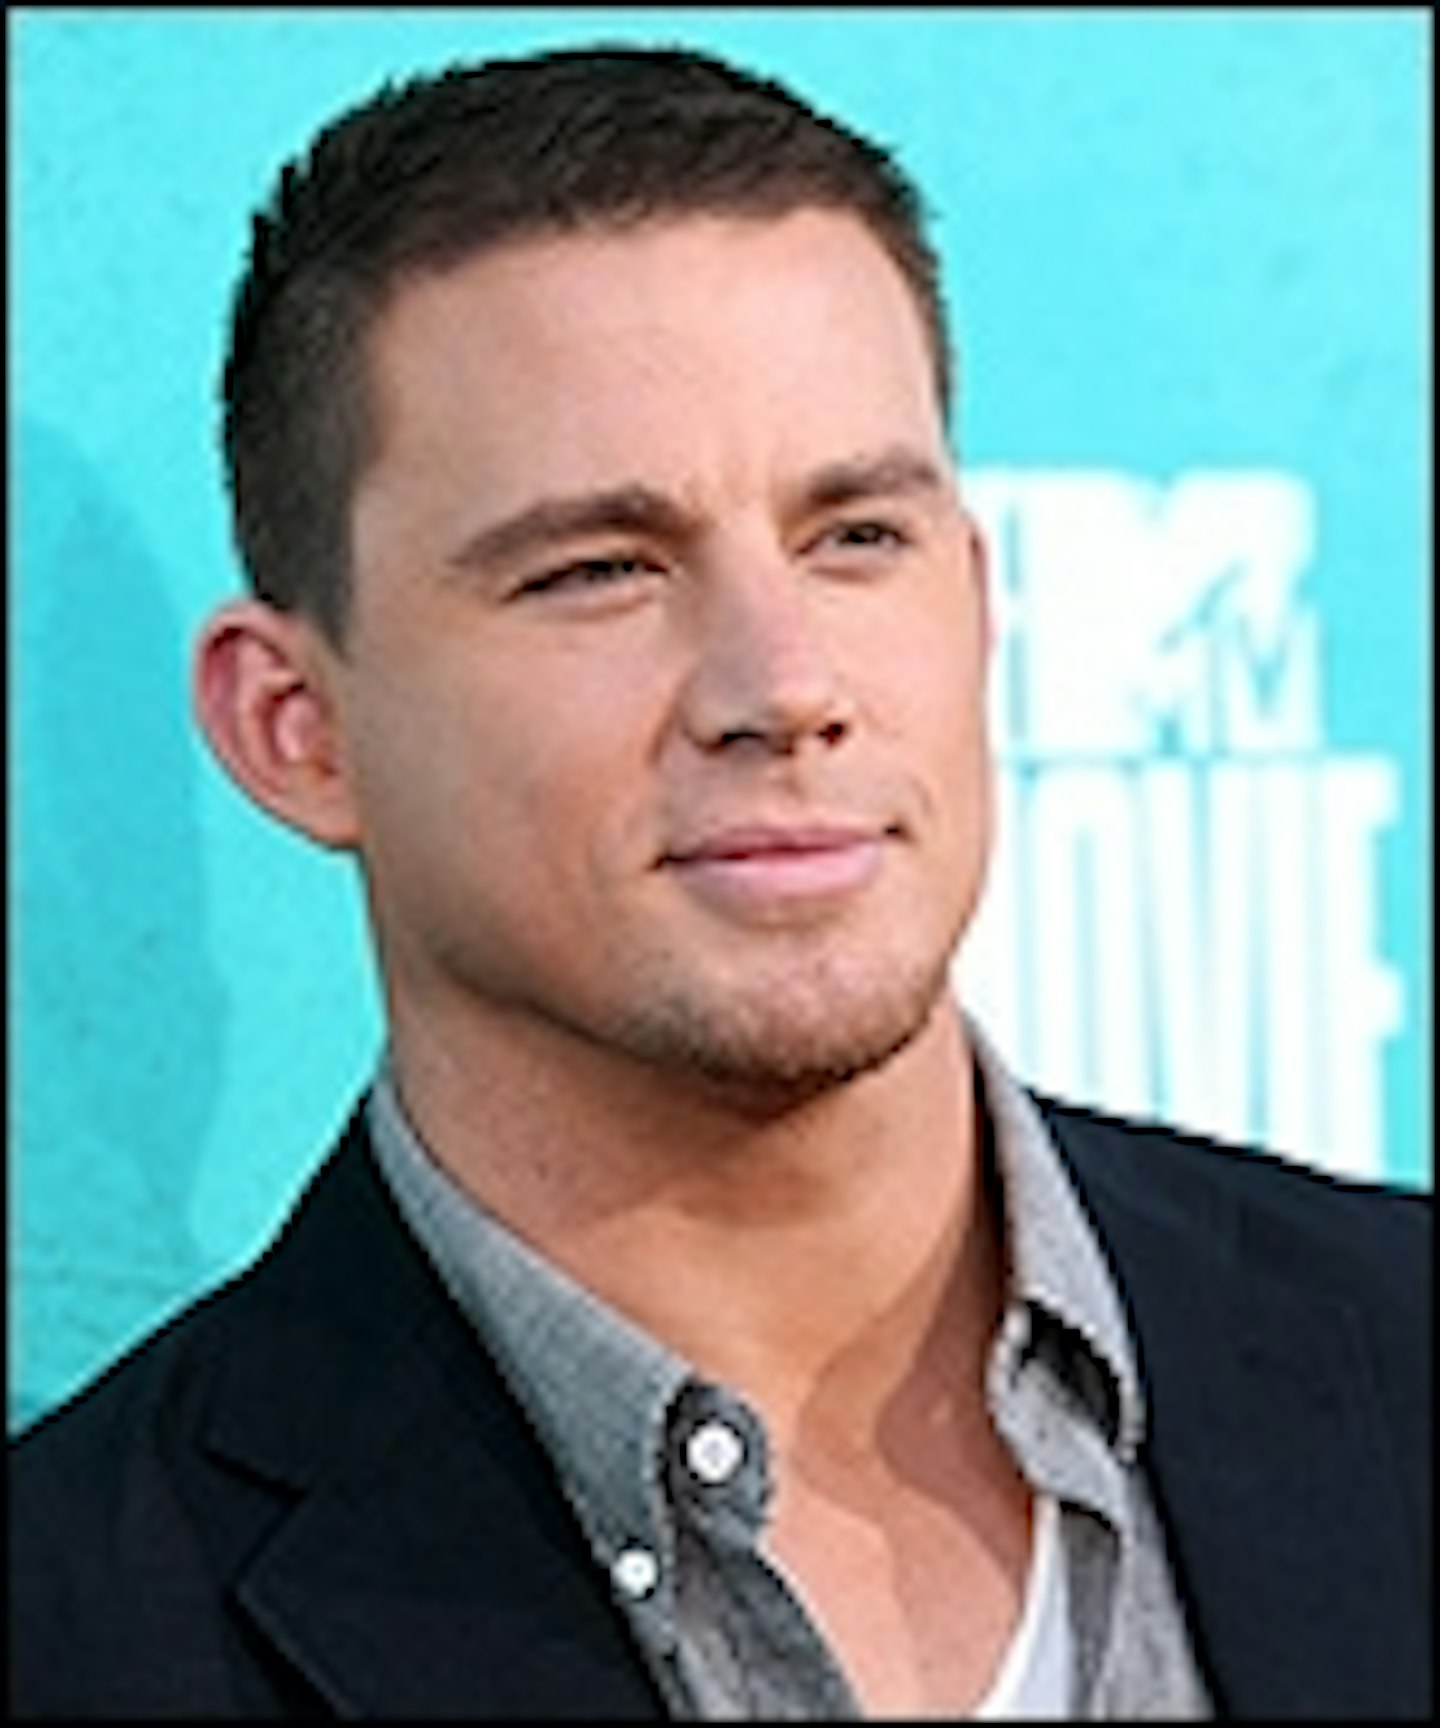 Channing Tatum May Join The Hateful Eight